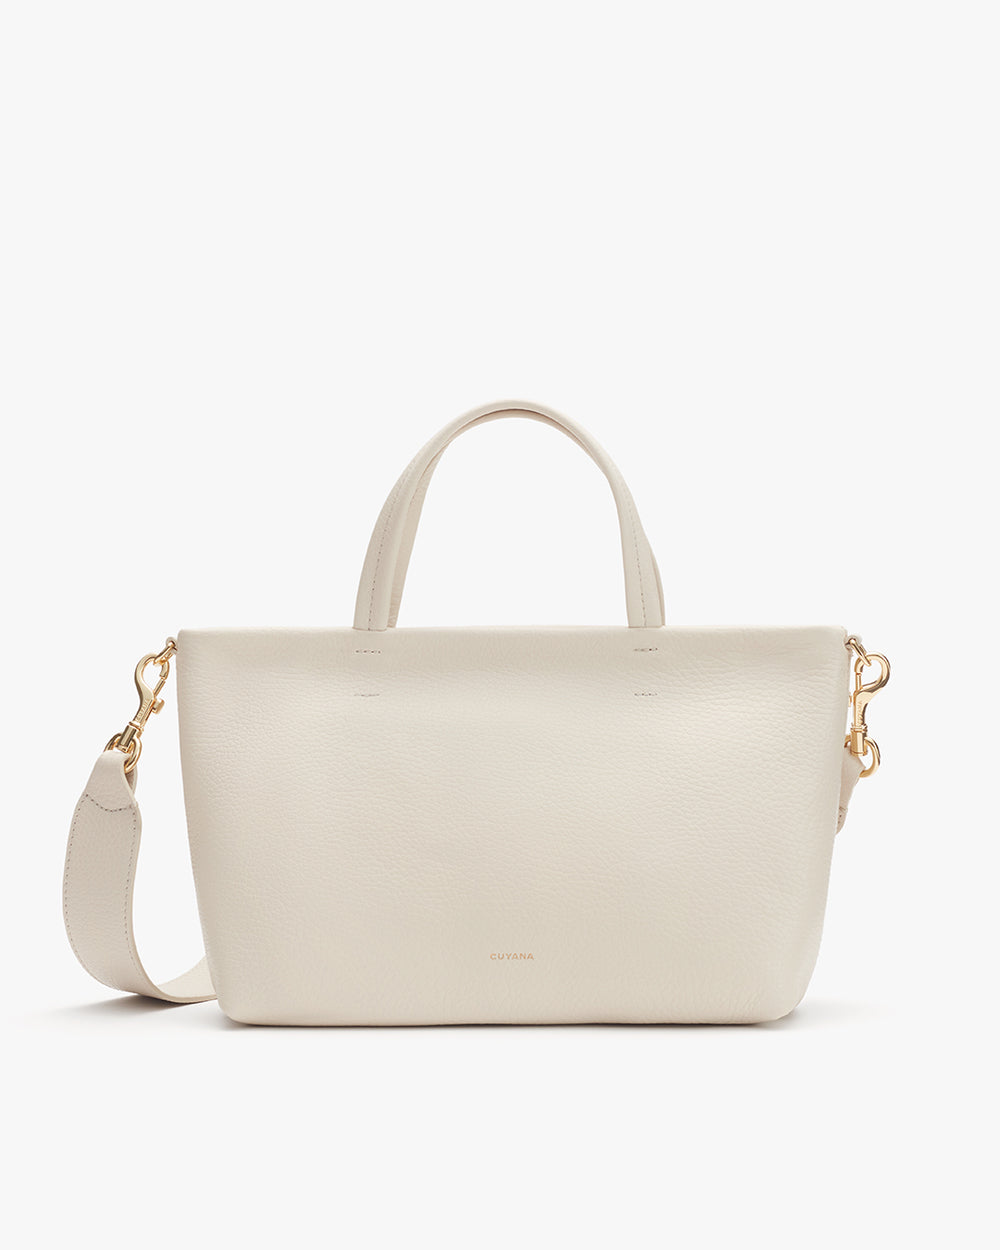 Handbag with top handles and a shoulder strap, positioned upright.